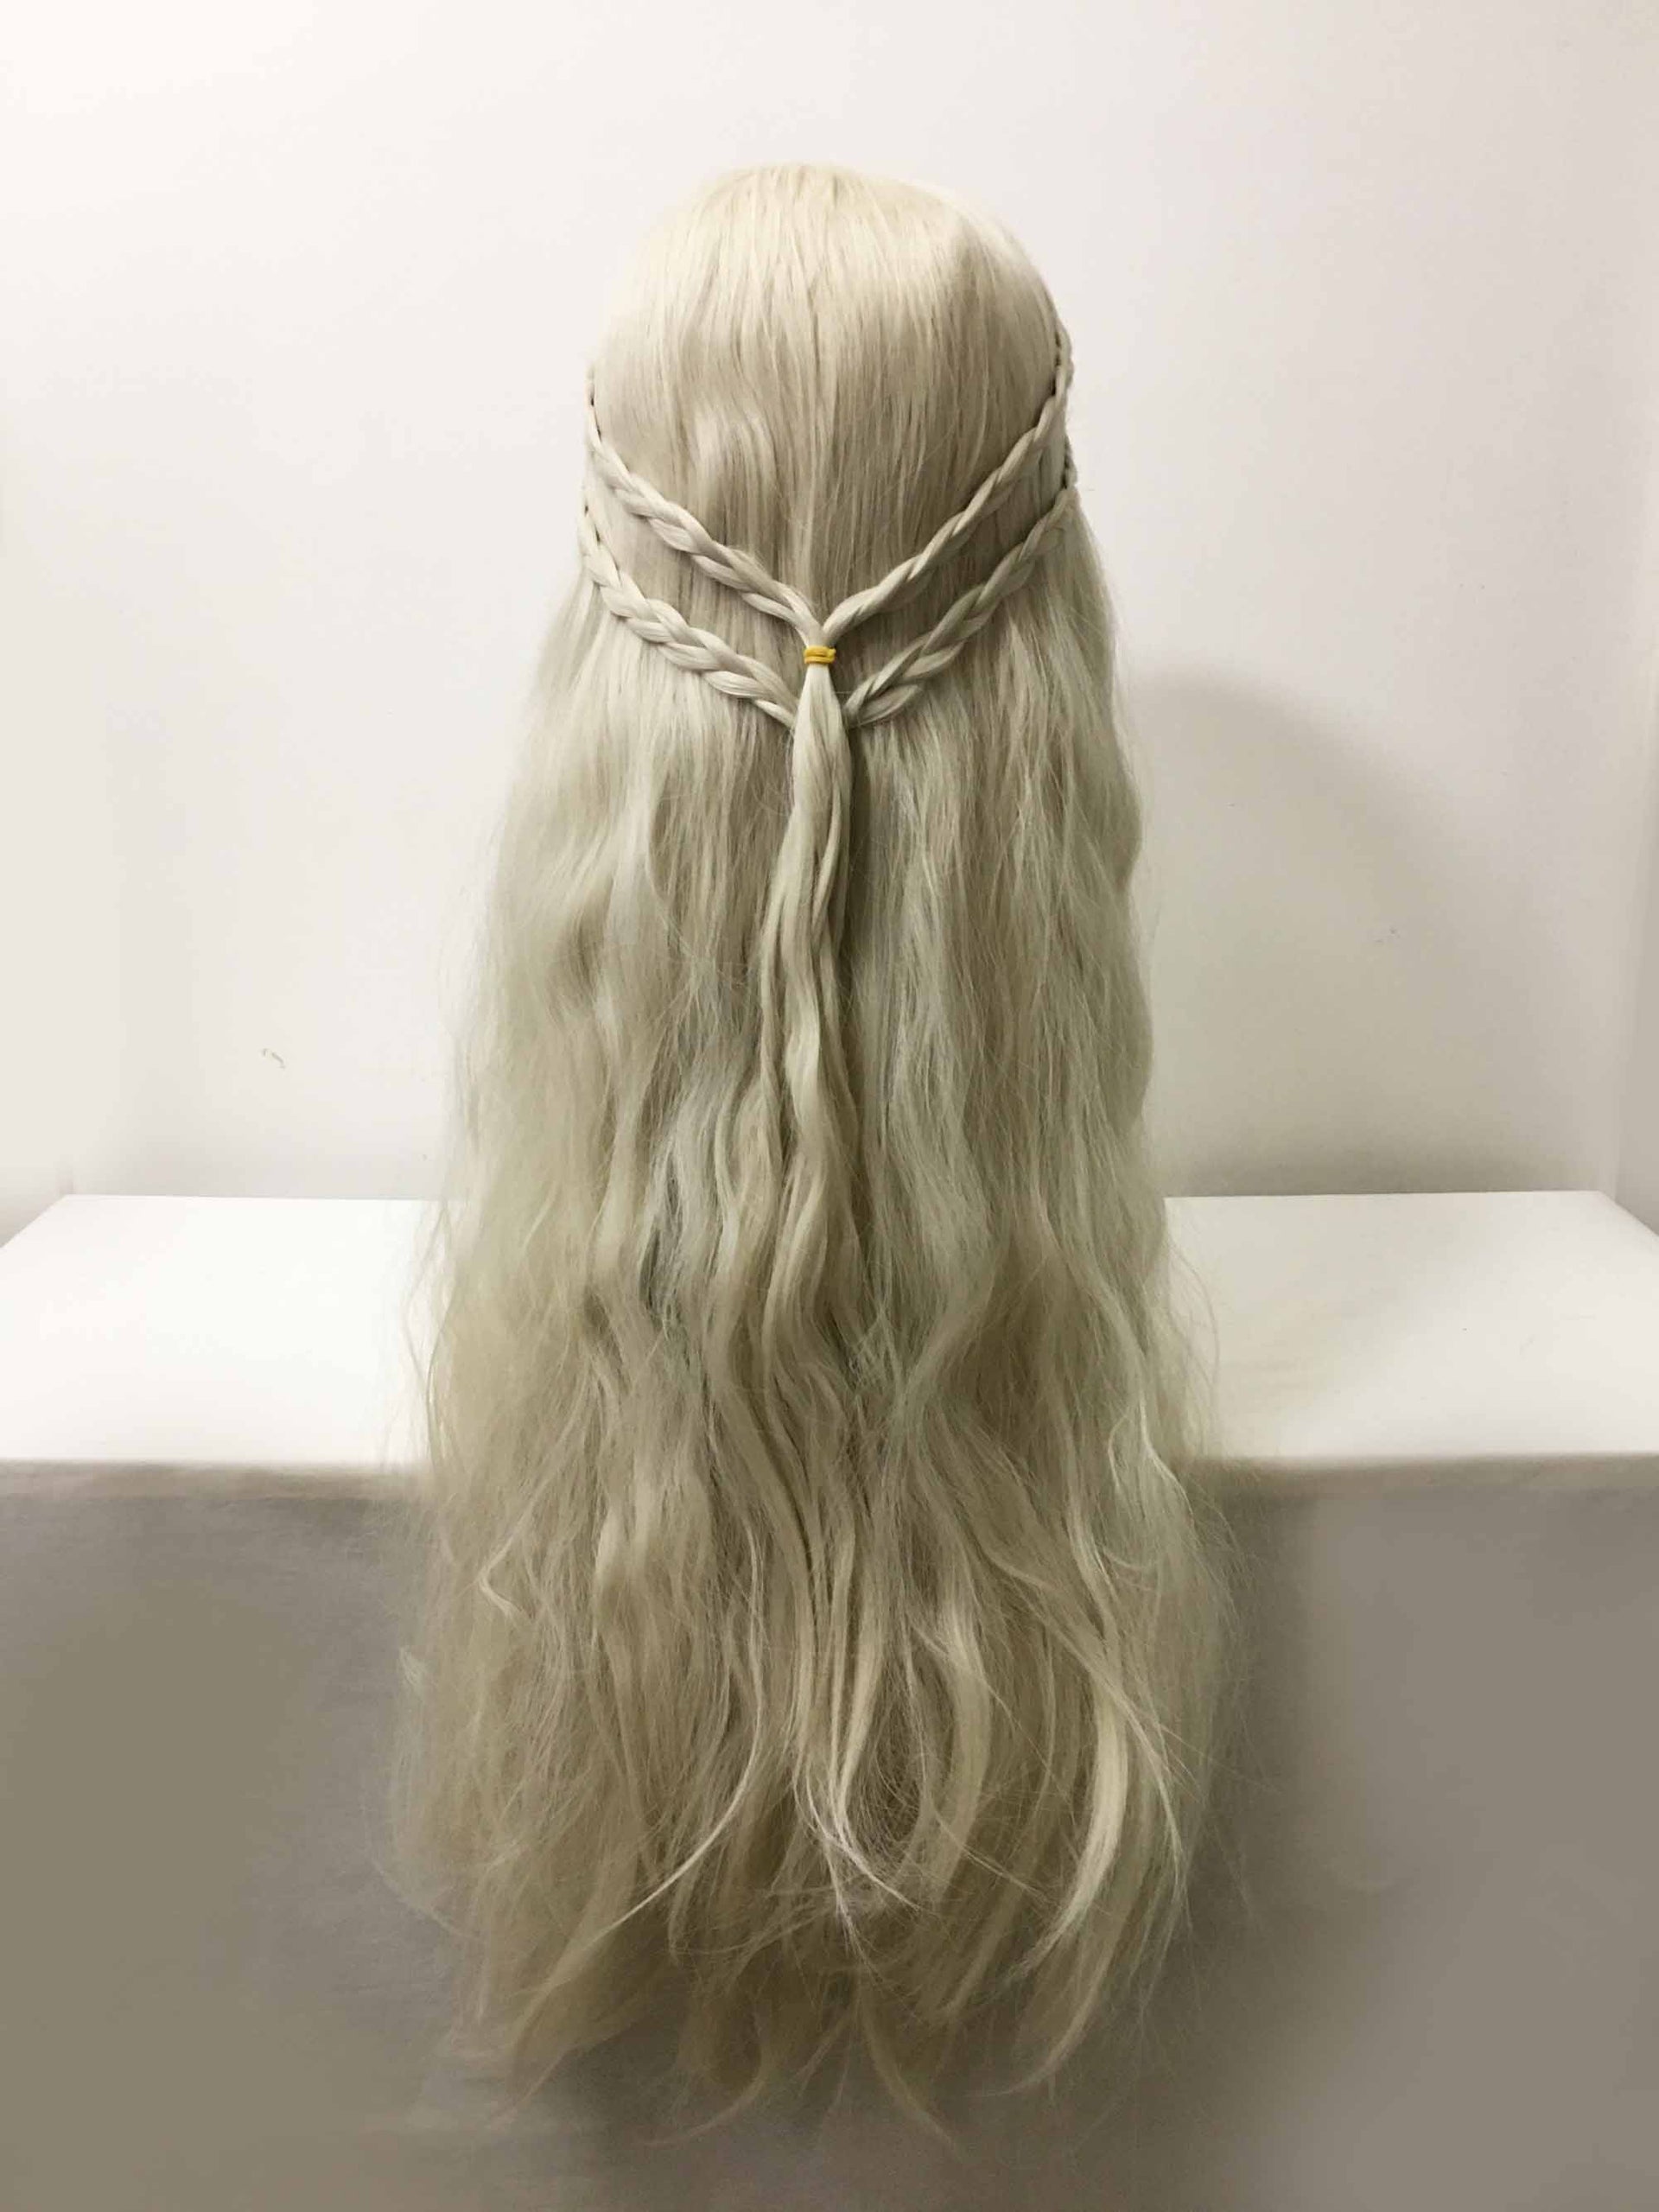 nevermindyrhead Women White Long Wavy Frizzy Princess Style Braided Side Part Cosplay Wig